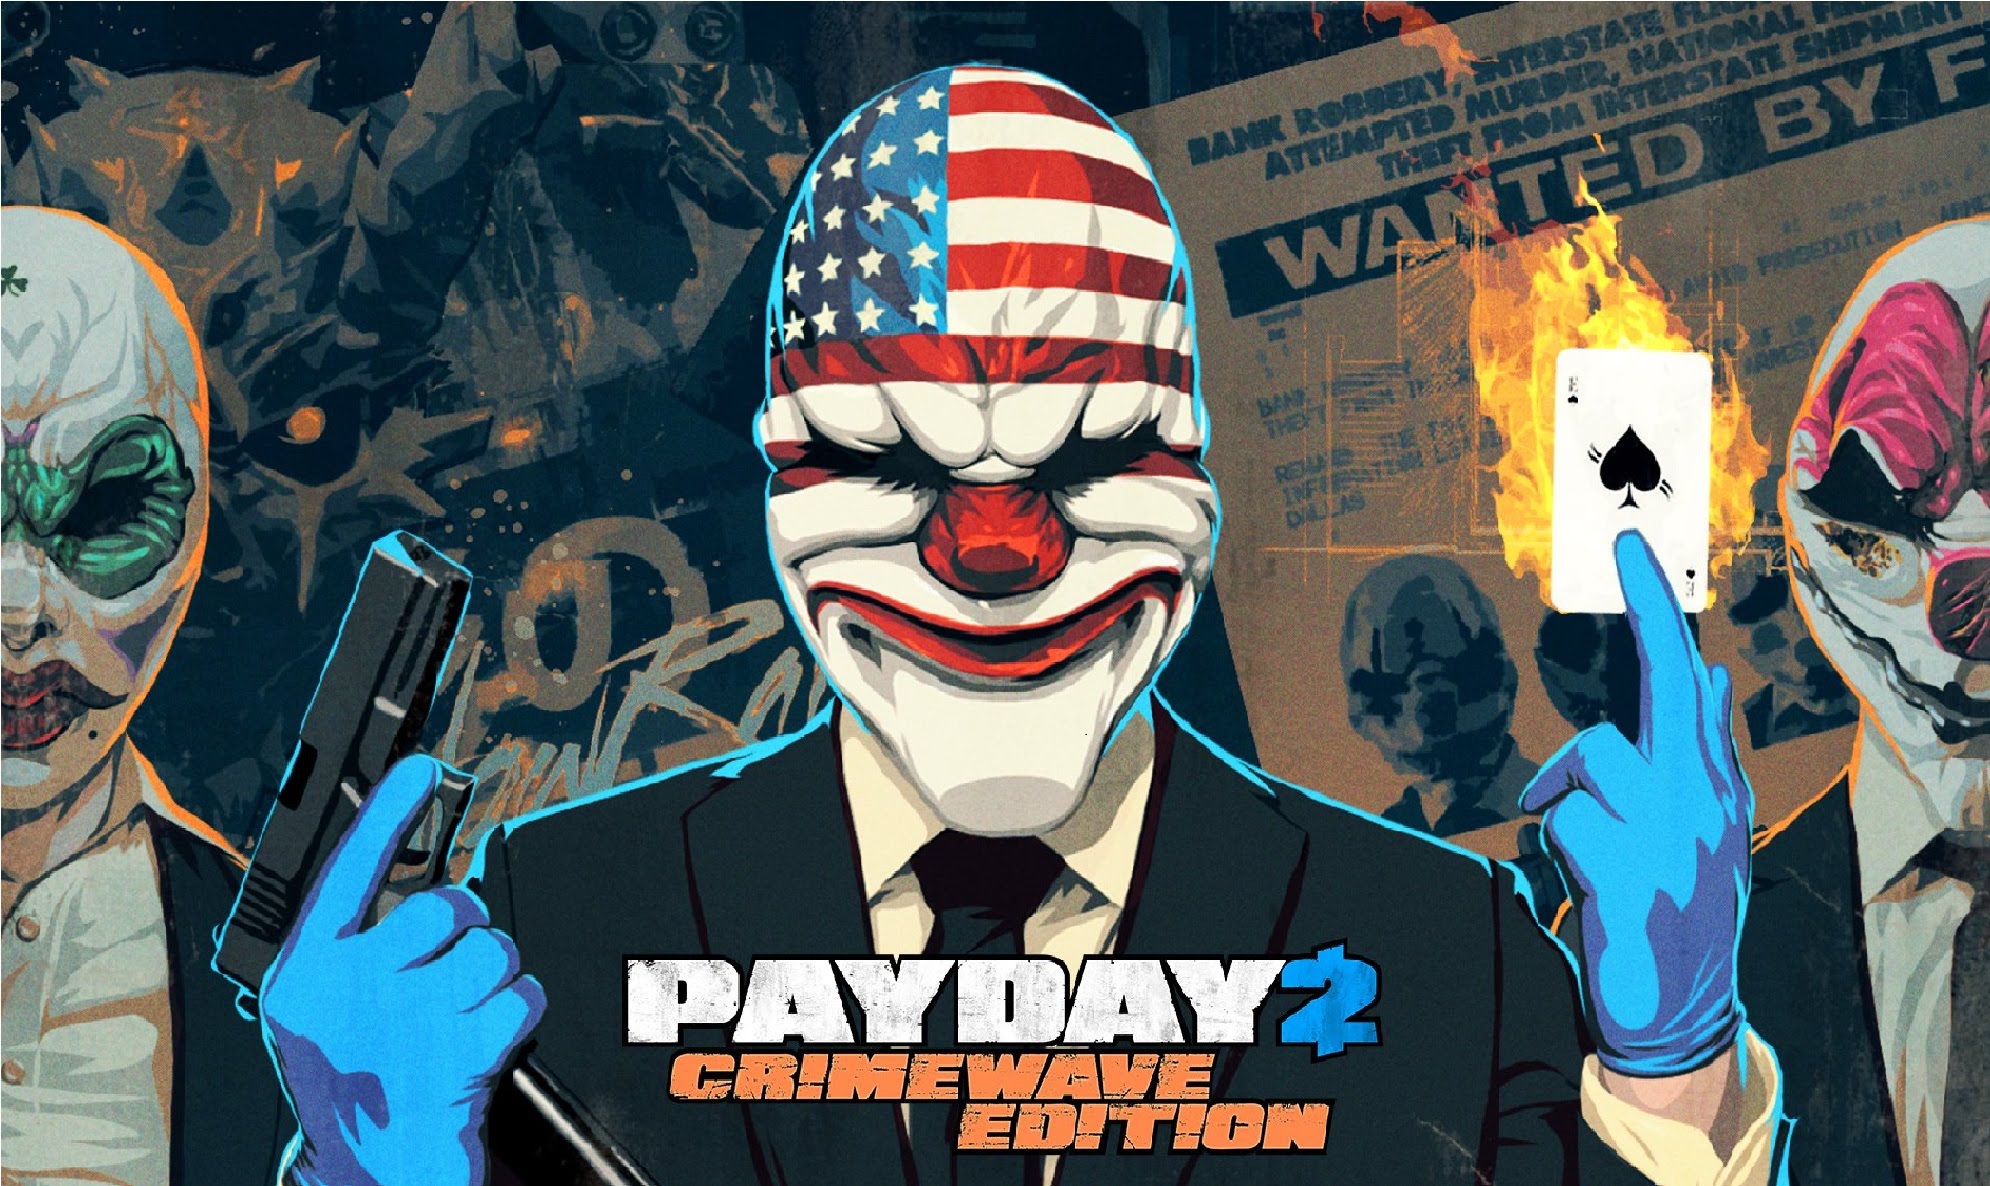 Clover Payday Dallas Payday Hoxton Payday Payday 2 1990x1186